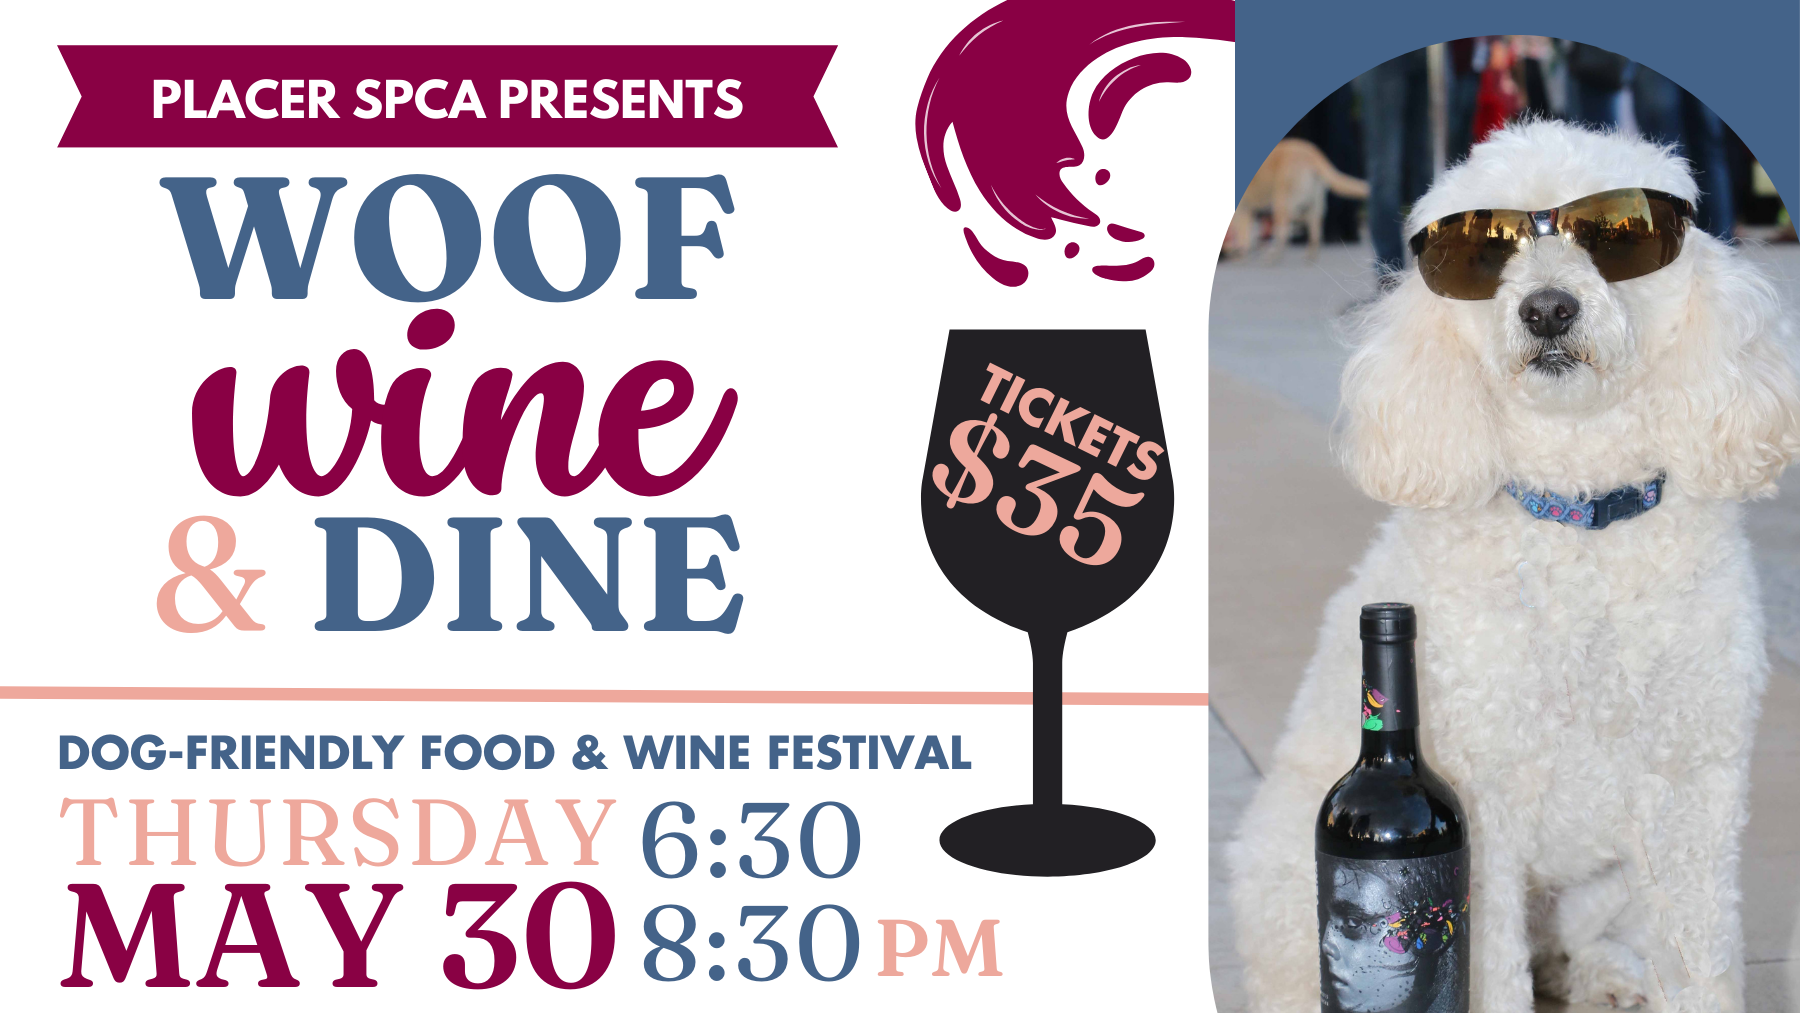 Promotional image for "Woof Wine & Dine," a dog-friendly food and wine festival hosted by Placer SPCA. The event is scheduled for Thursday, May 30, from 6:30 PM to 8:30 PM. The image features a dog wearing sunglasses, a bottle of wine, and ticket information priced at $35.